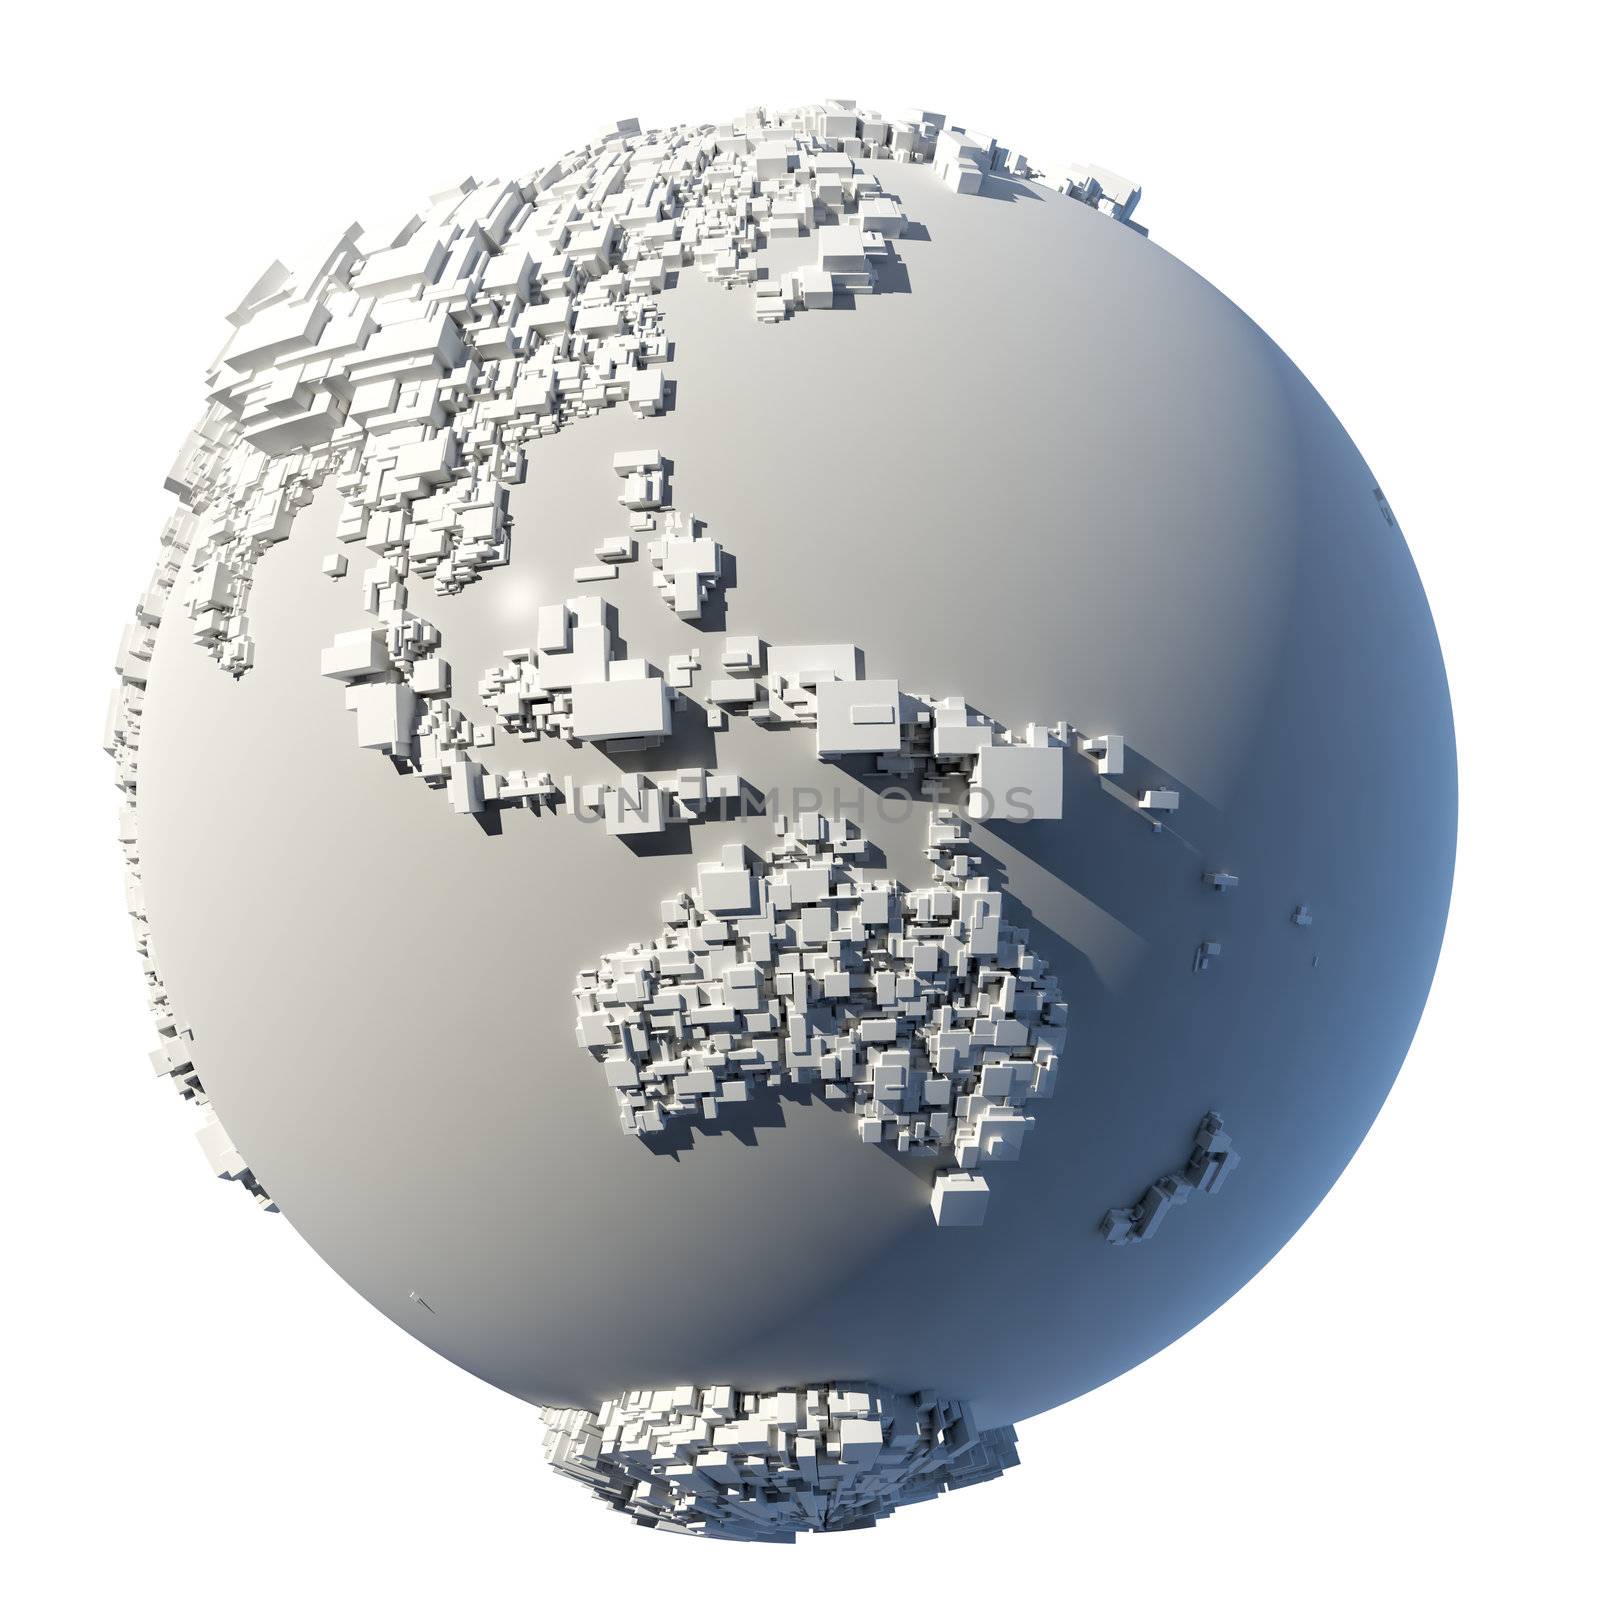 Cubic structure of the planet Earth by Antartis